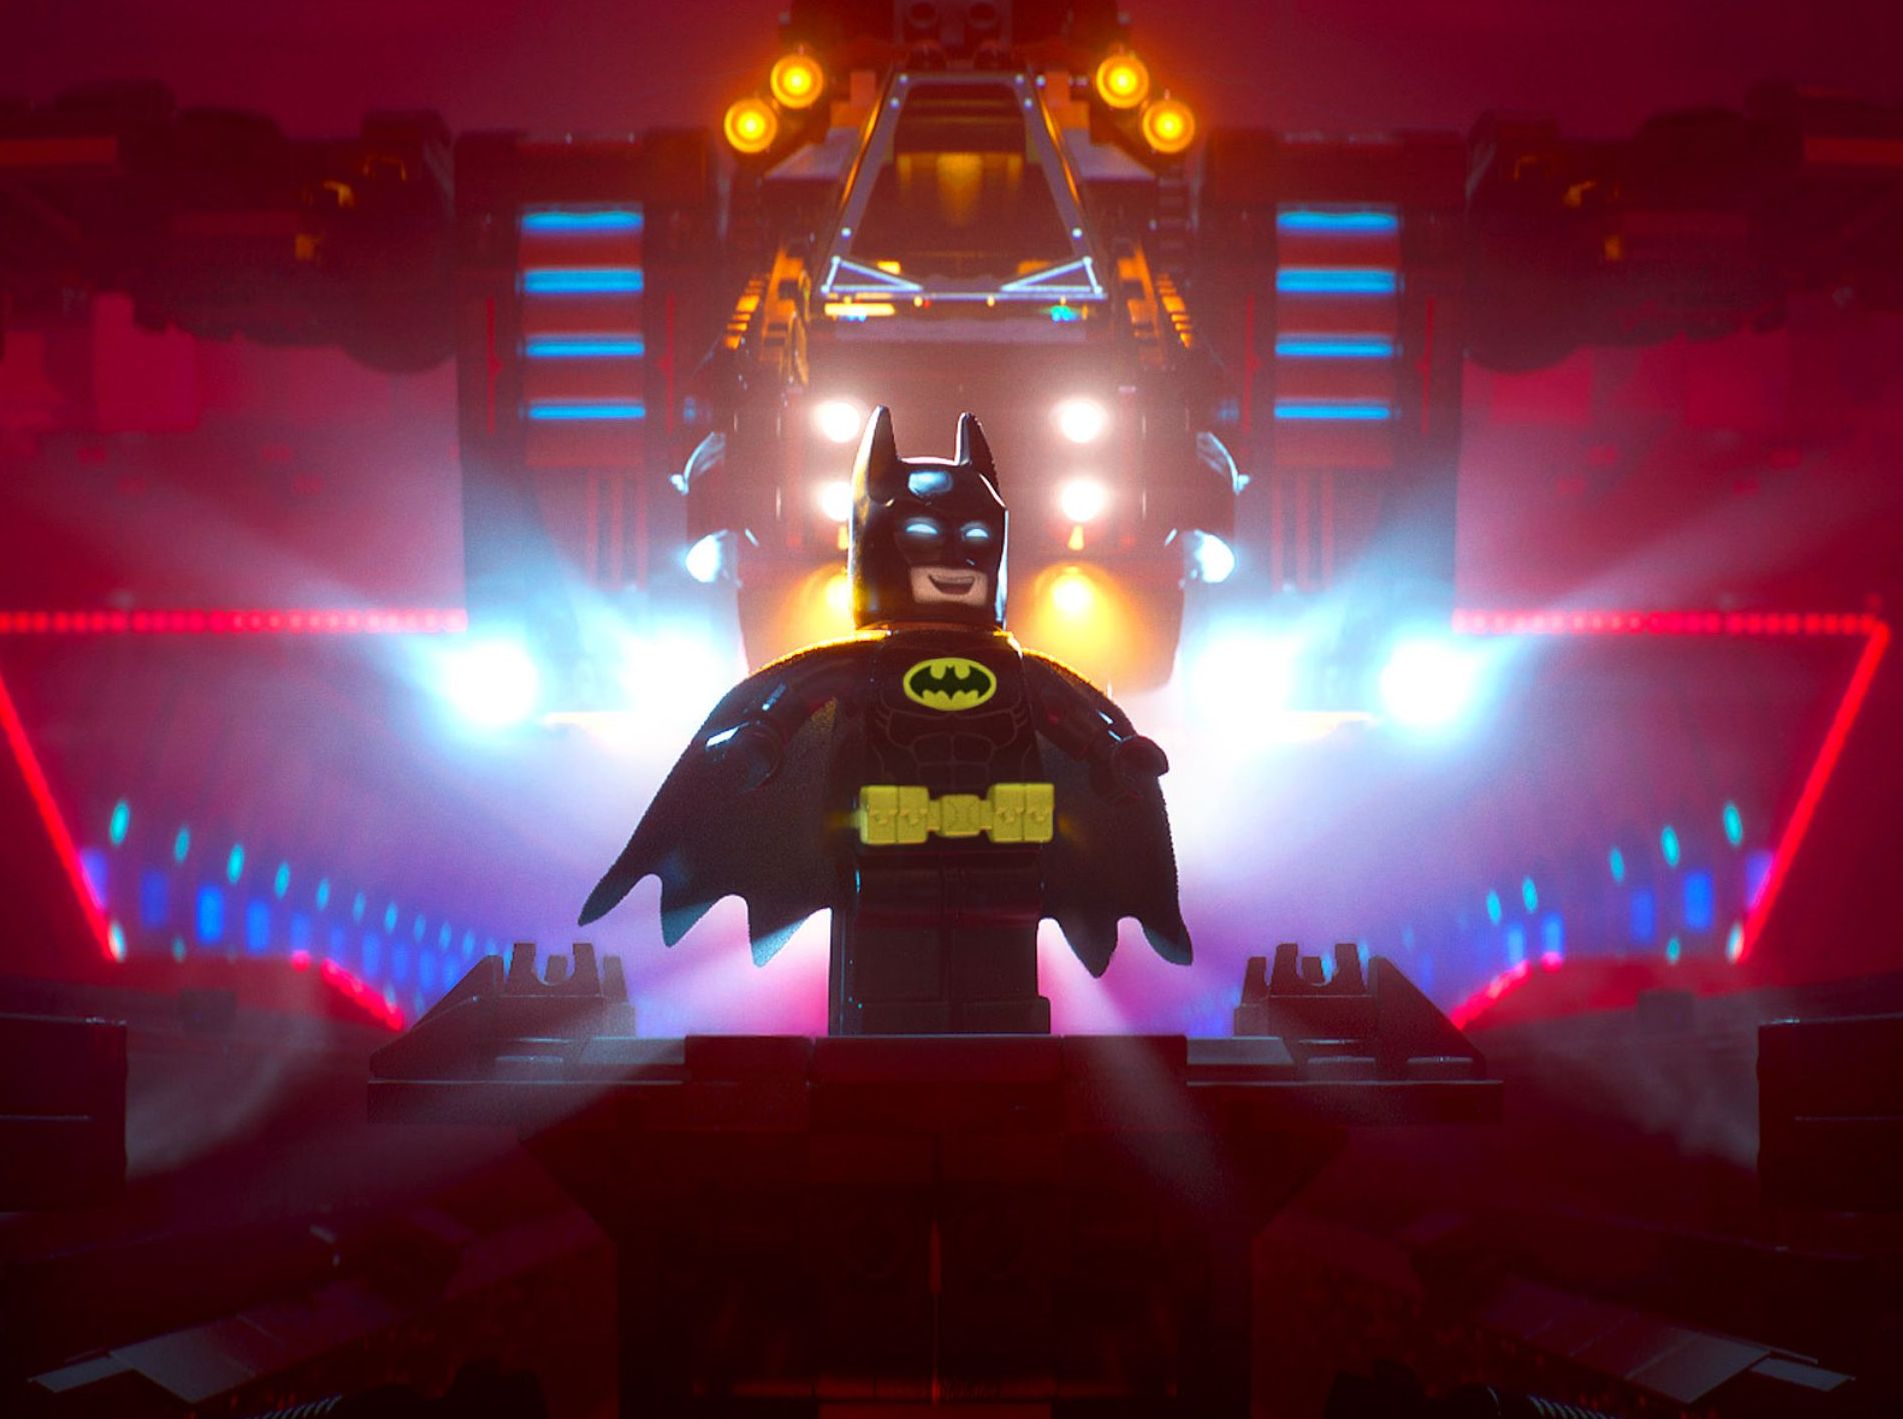 The Lego Batman movie trailer is coming this week